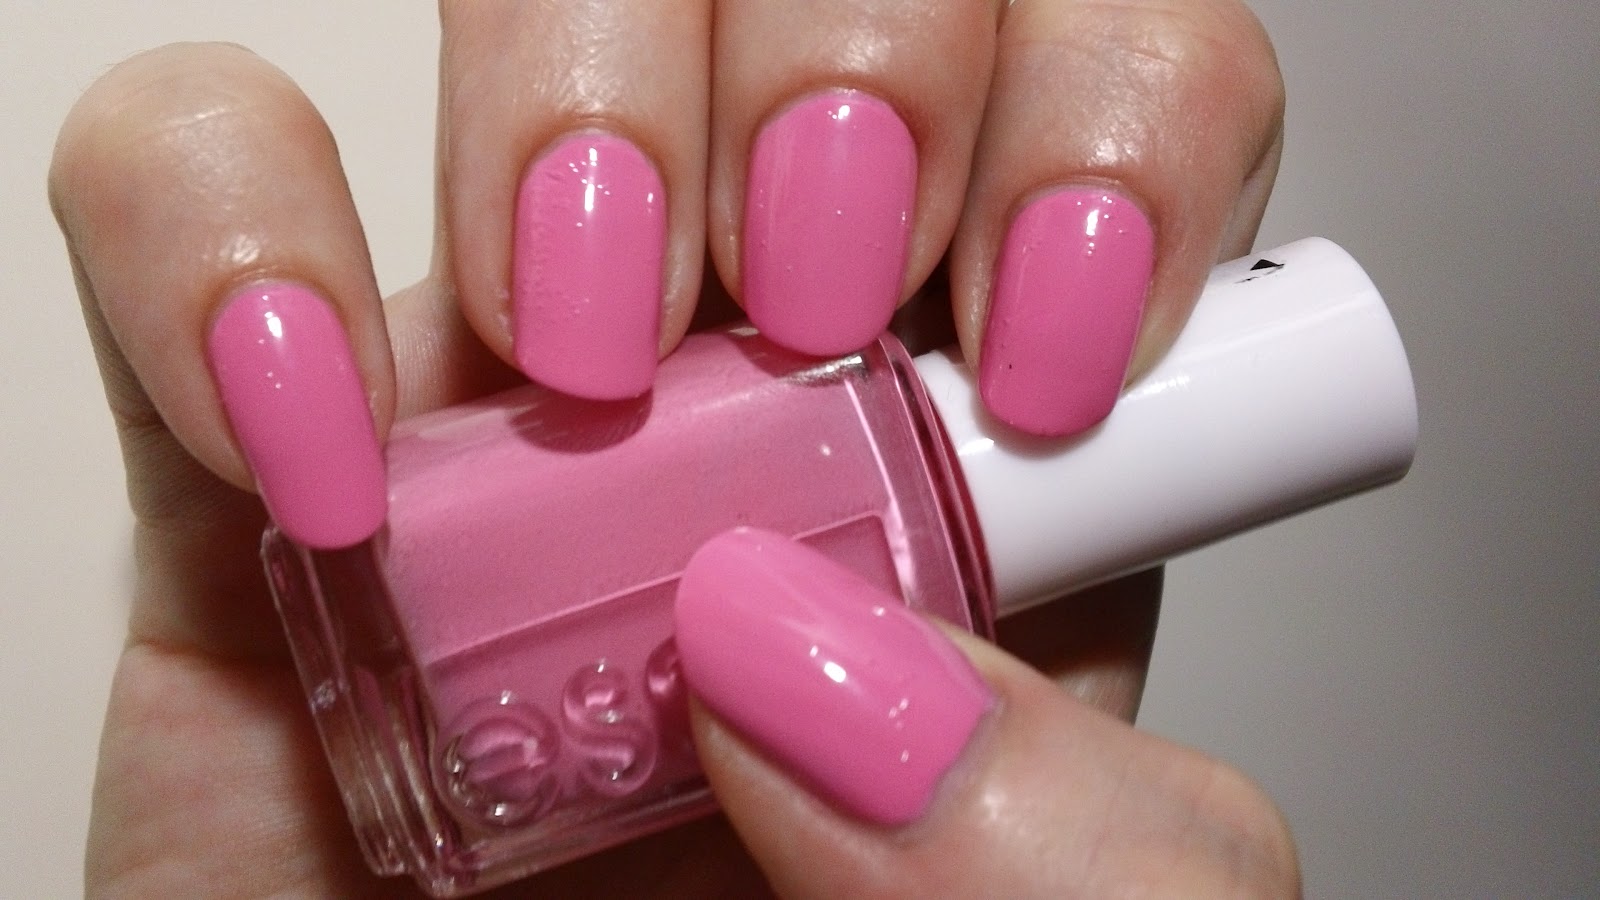 8. "Best Nail Polish for Light Pink Skin" - wide 7